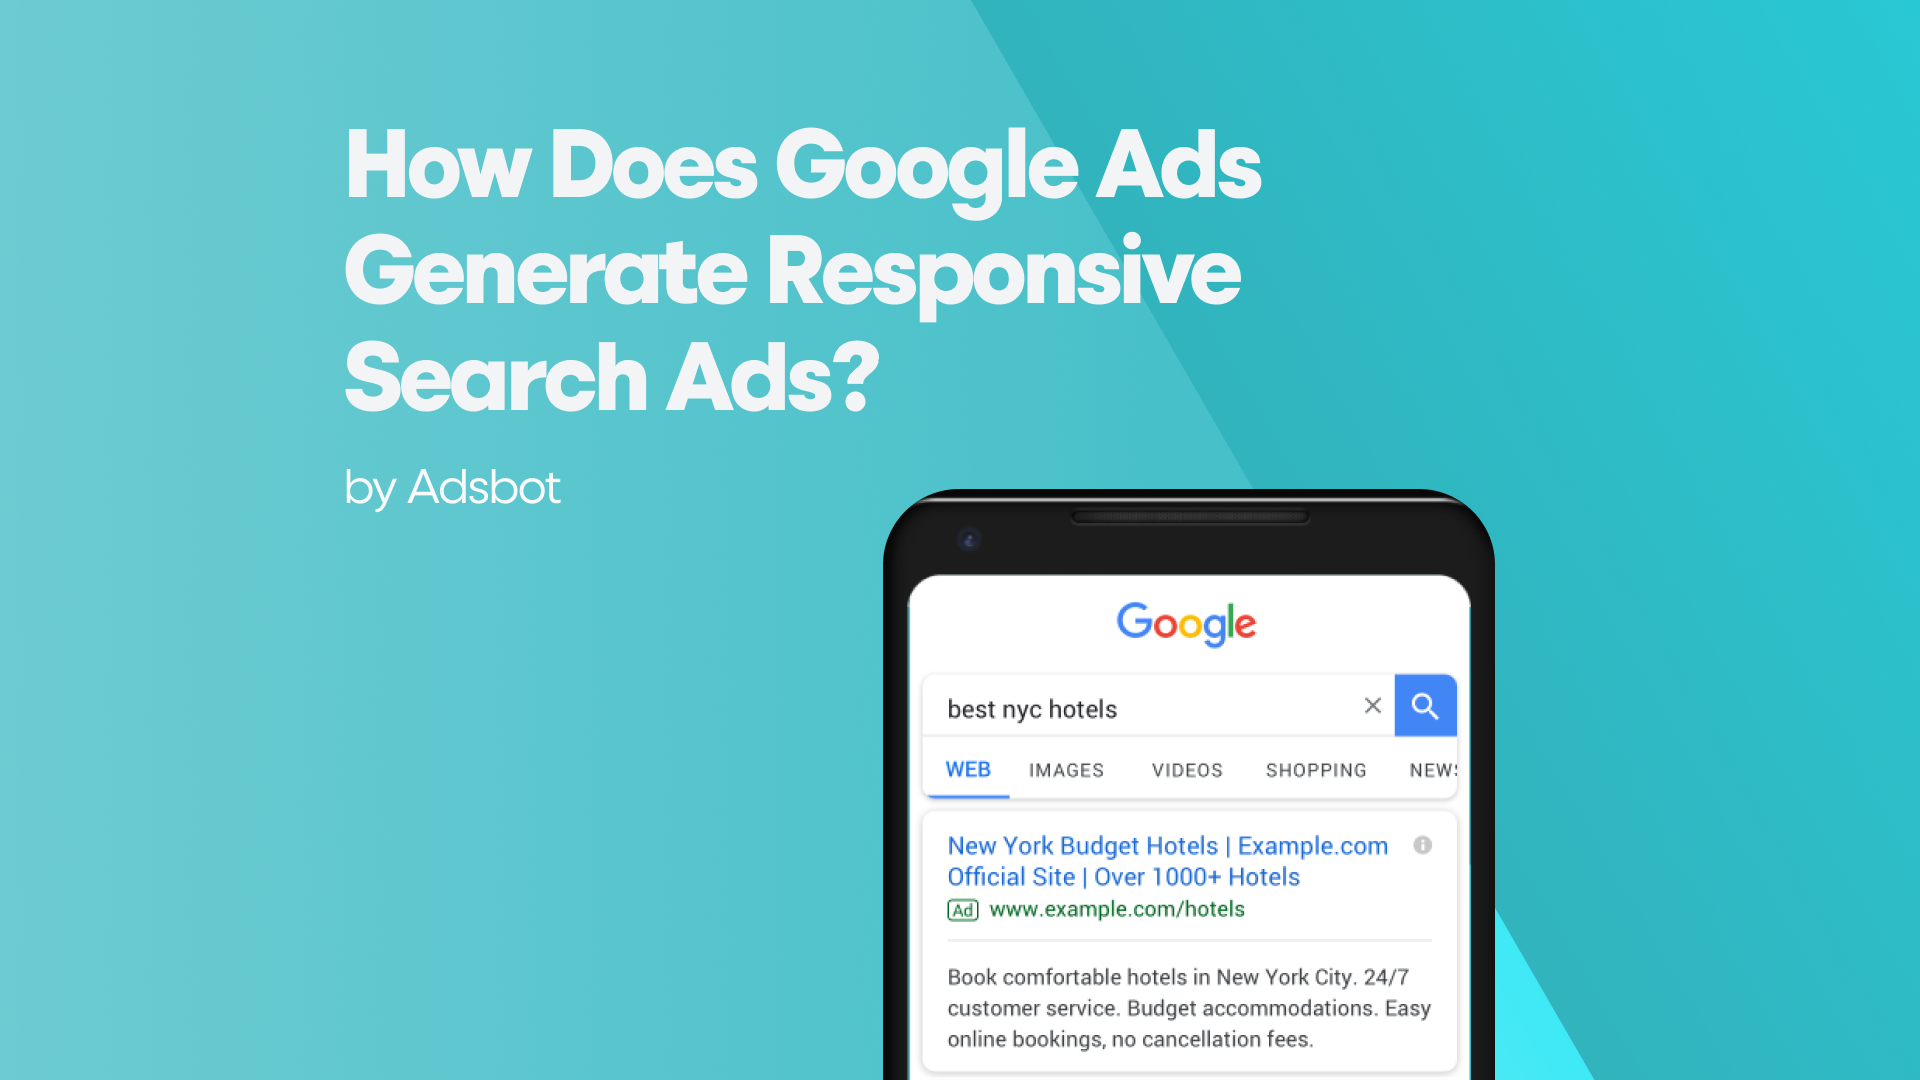 Google Ads Generate Responsive Search Ads